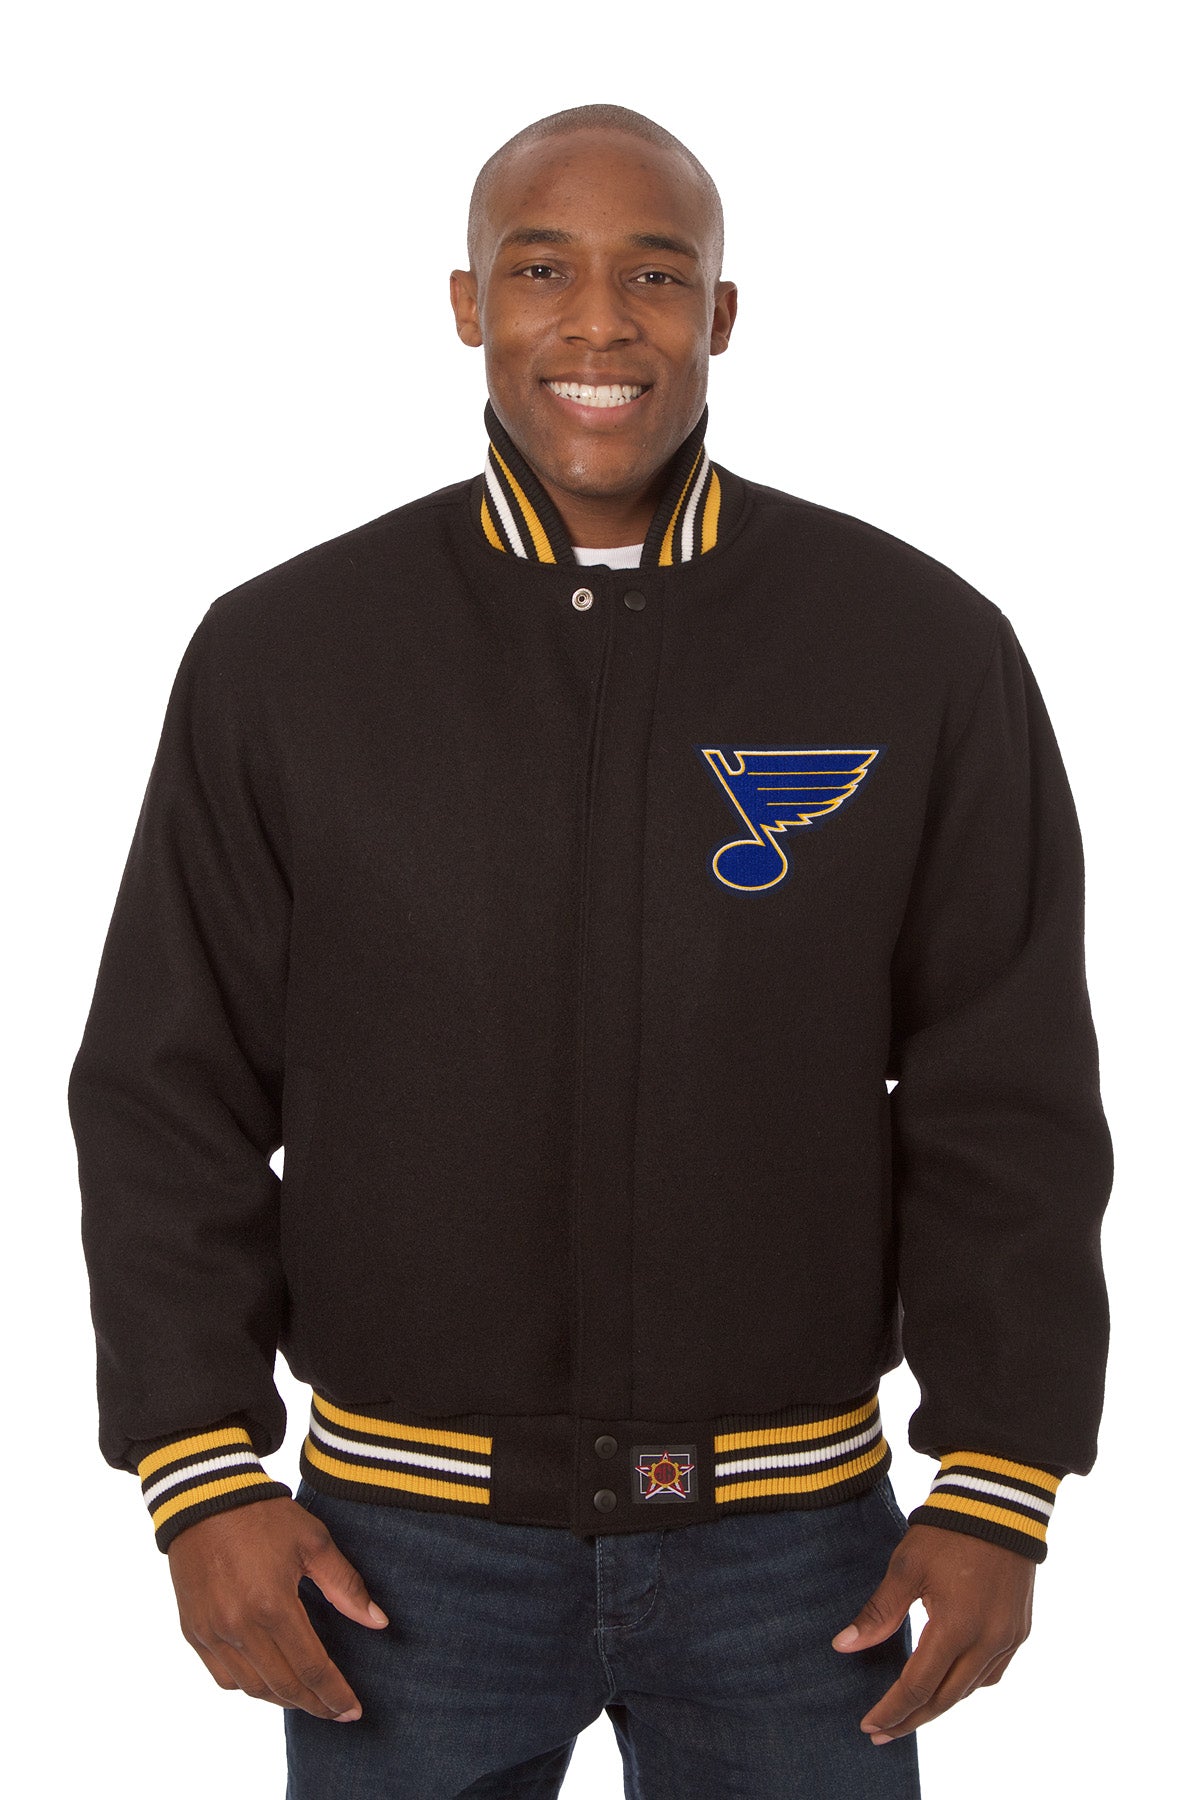 St. Louis Blues Embroidered Wool Jacket